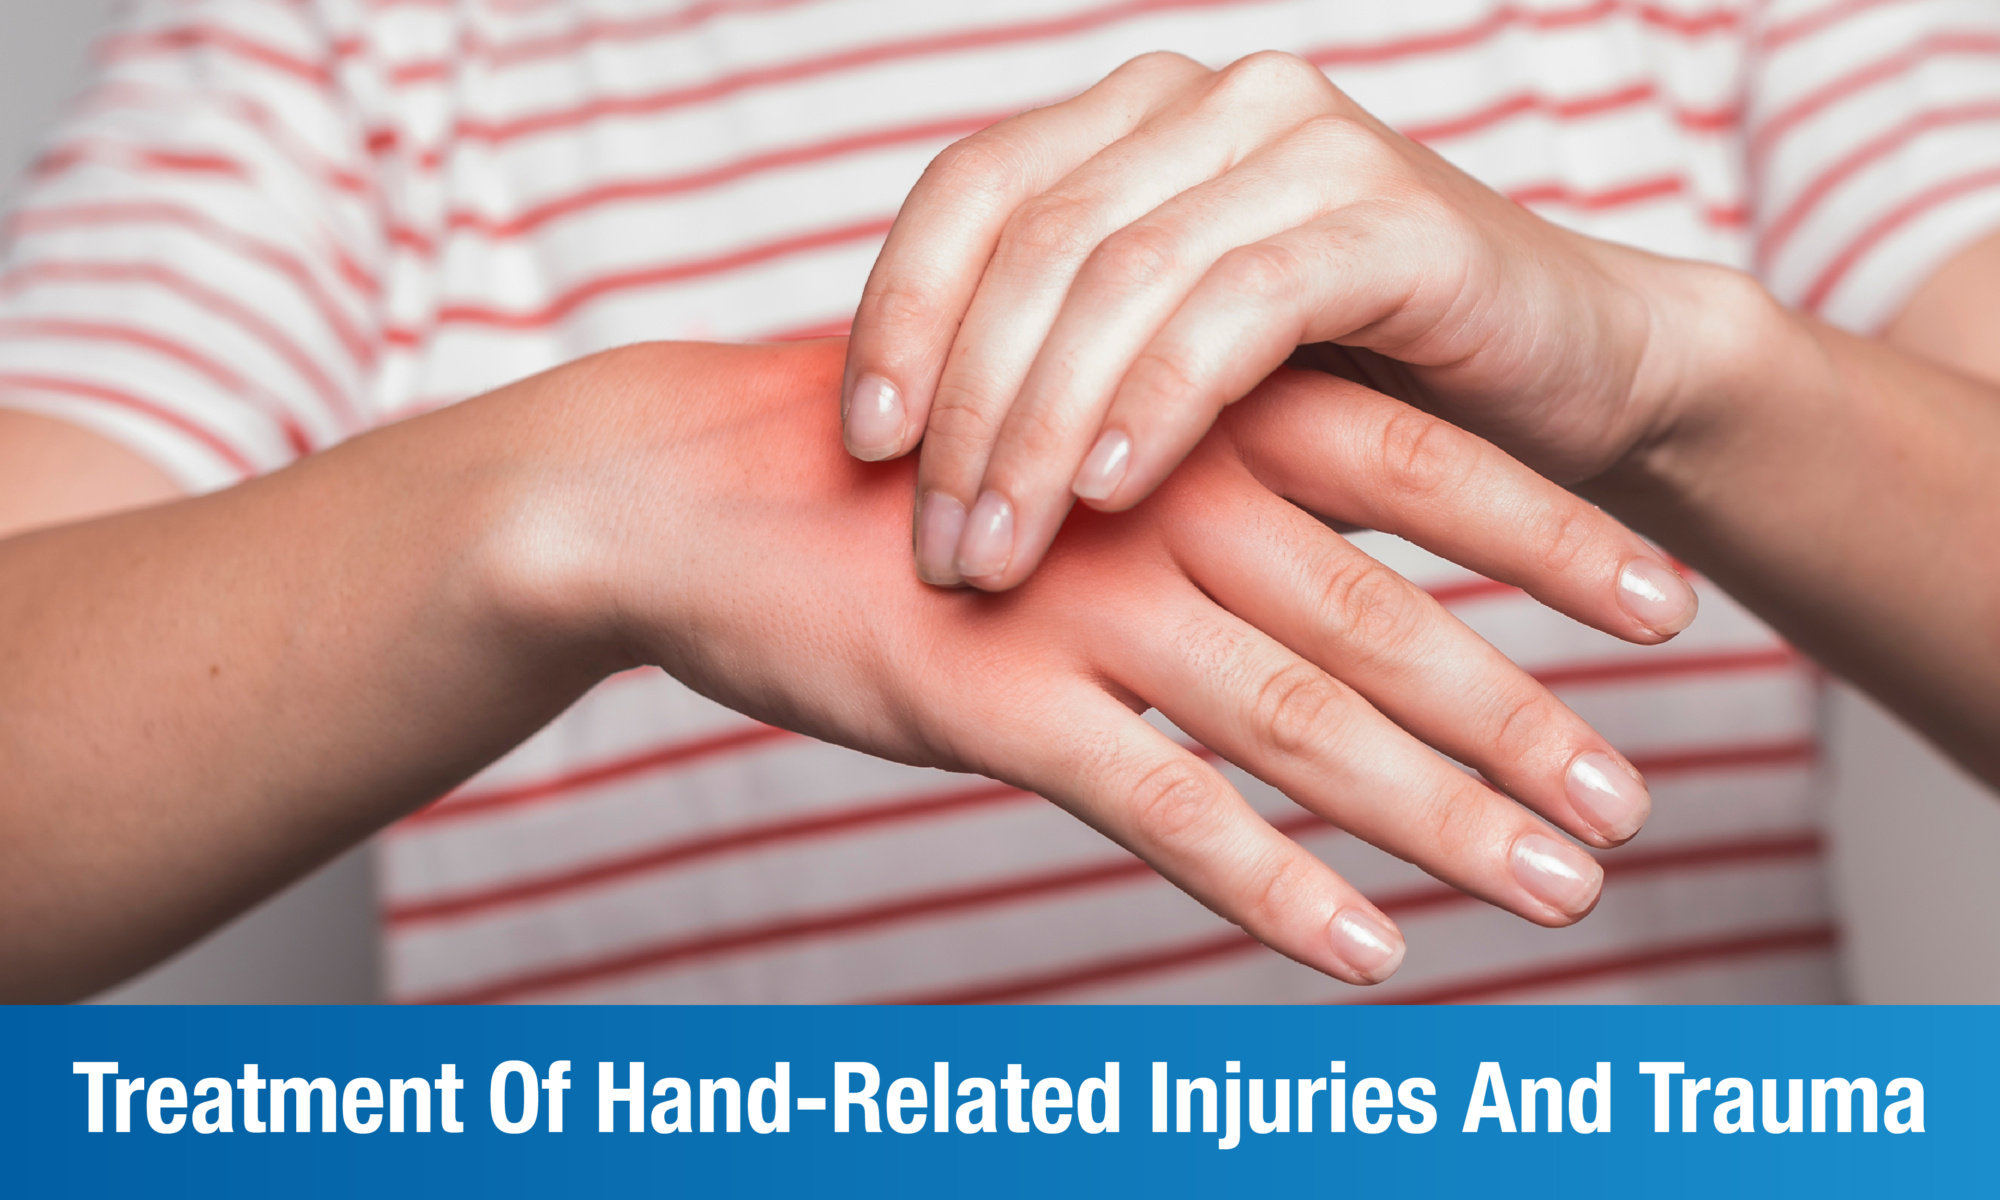 Commonly Witnessed Hand-Related Injuries and Trauma